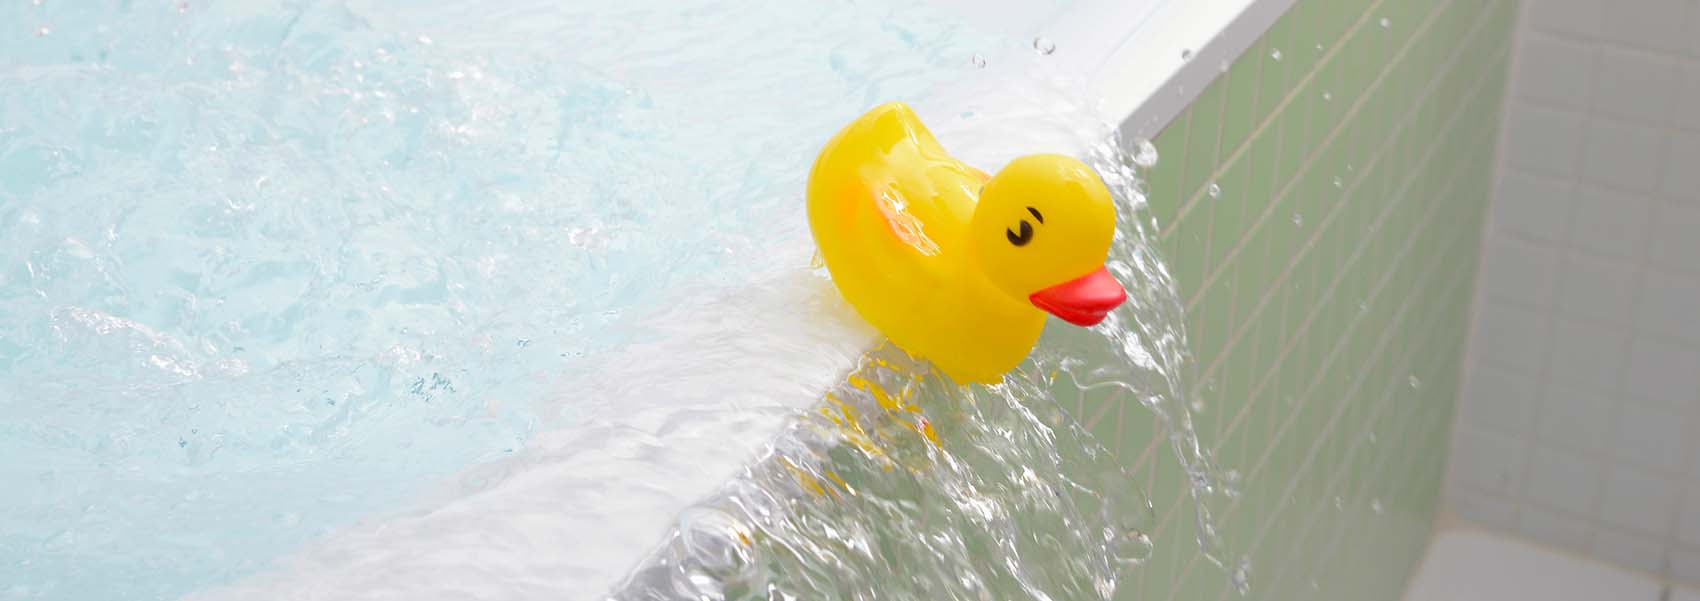 Rubber duck falling out of bath overflowing with water